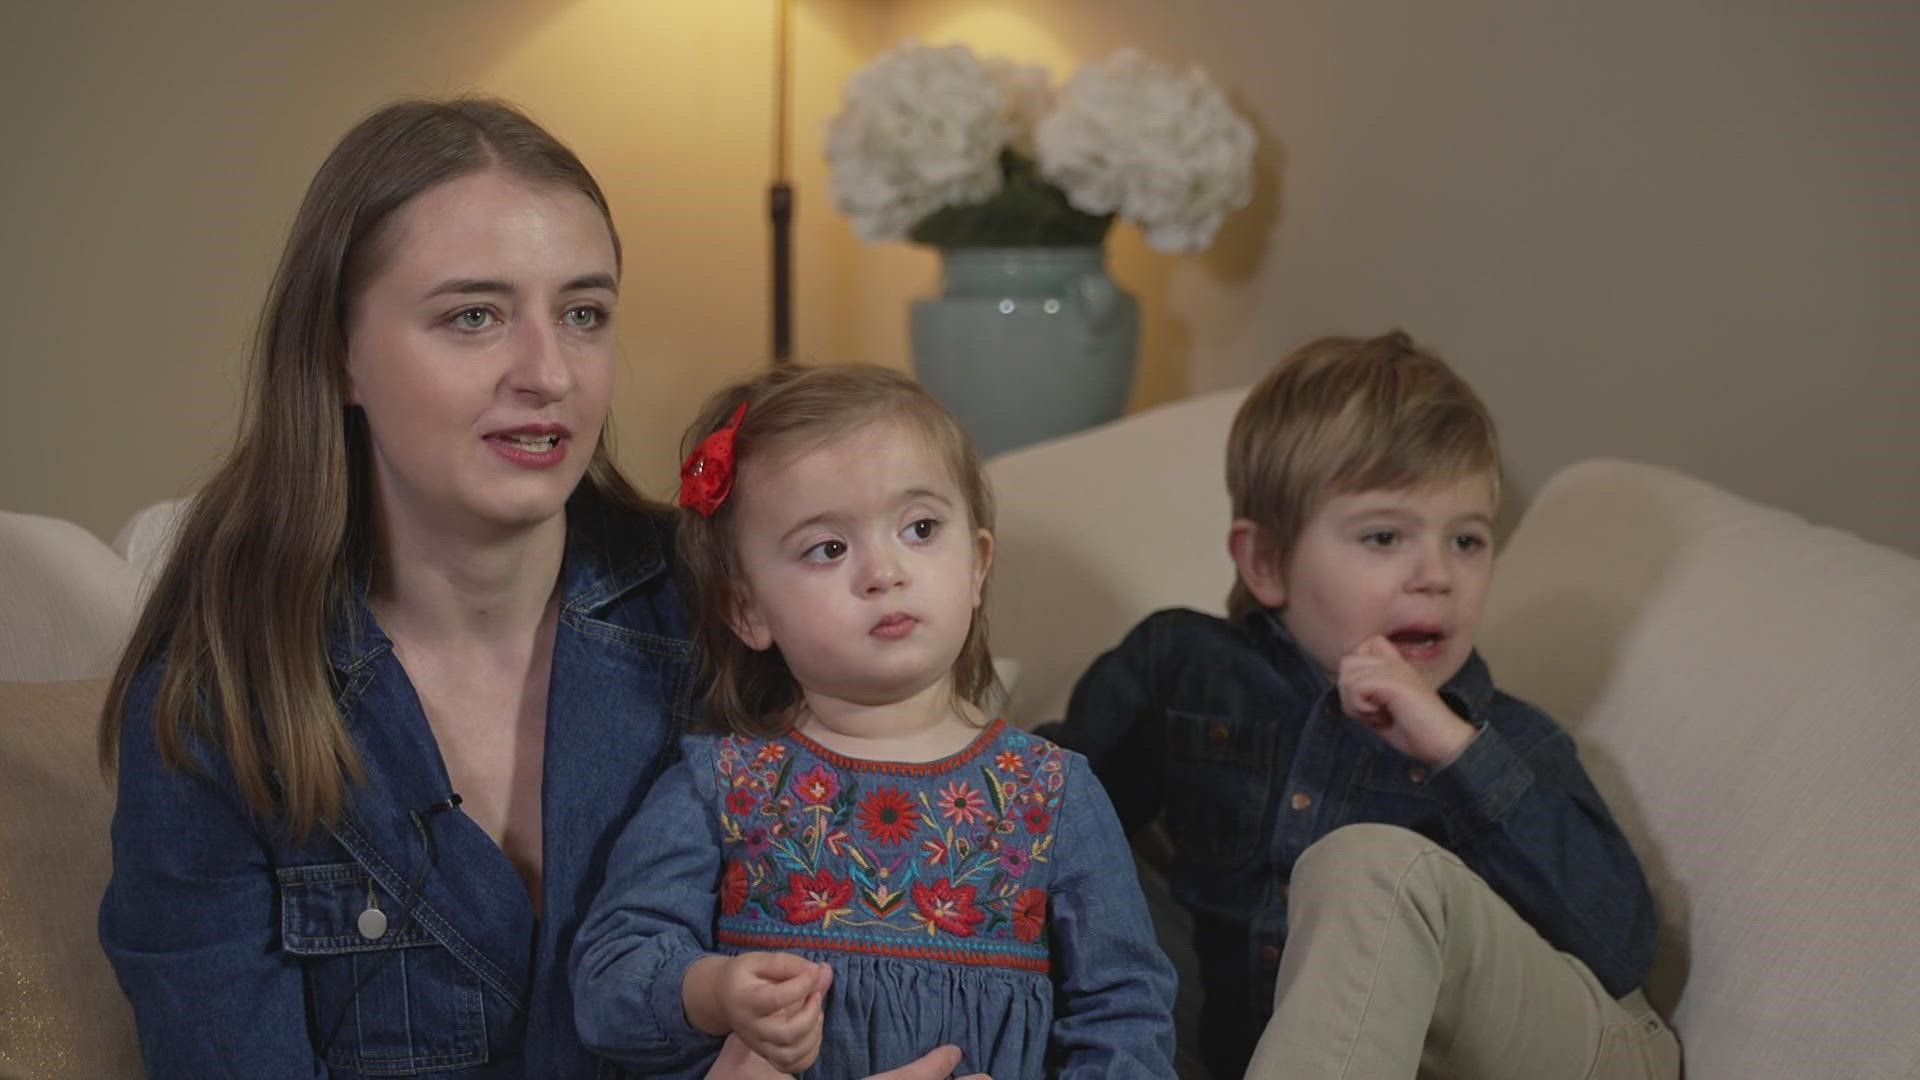 A mother and her young children fled war-torn Ukraine bound for Knoxville. Now, she is rebuilding their lives while her husband fights the Russians.